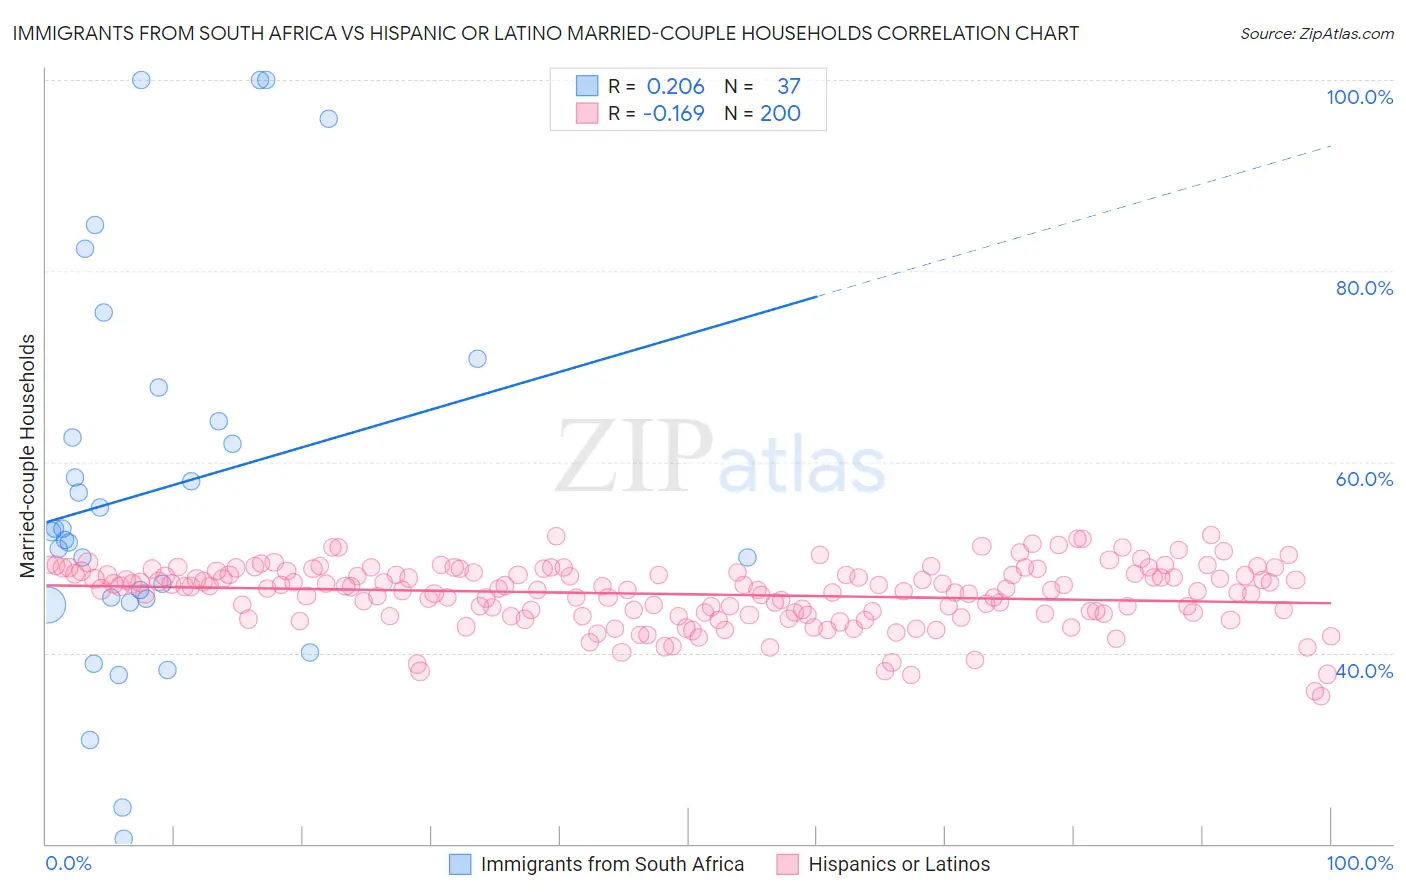 Immigrants from South Africa vs Hispanic or Latino Married-couple Households